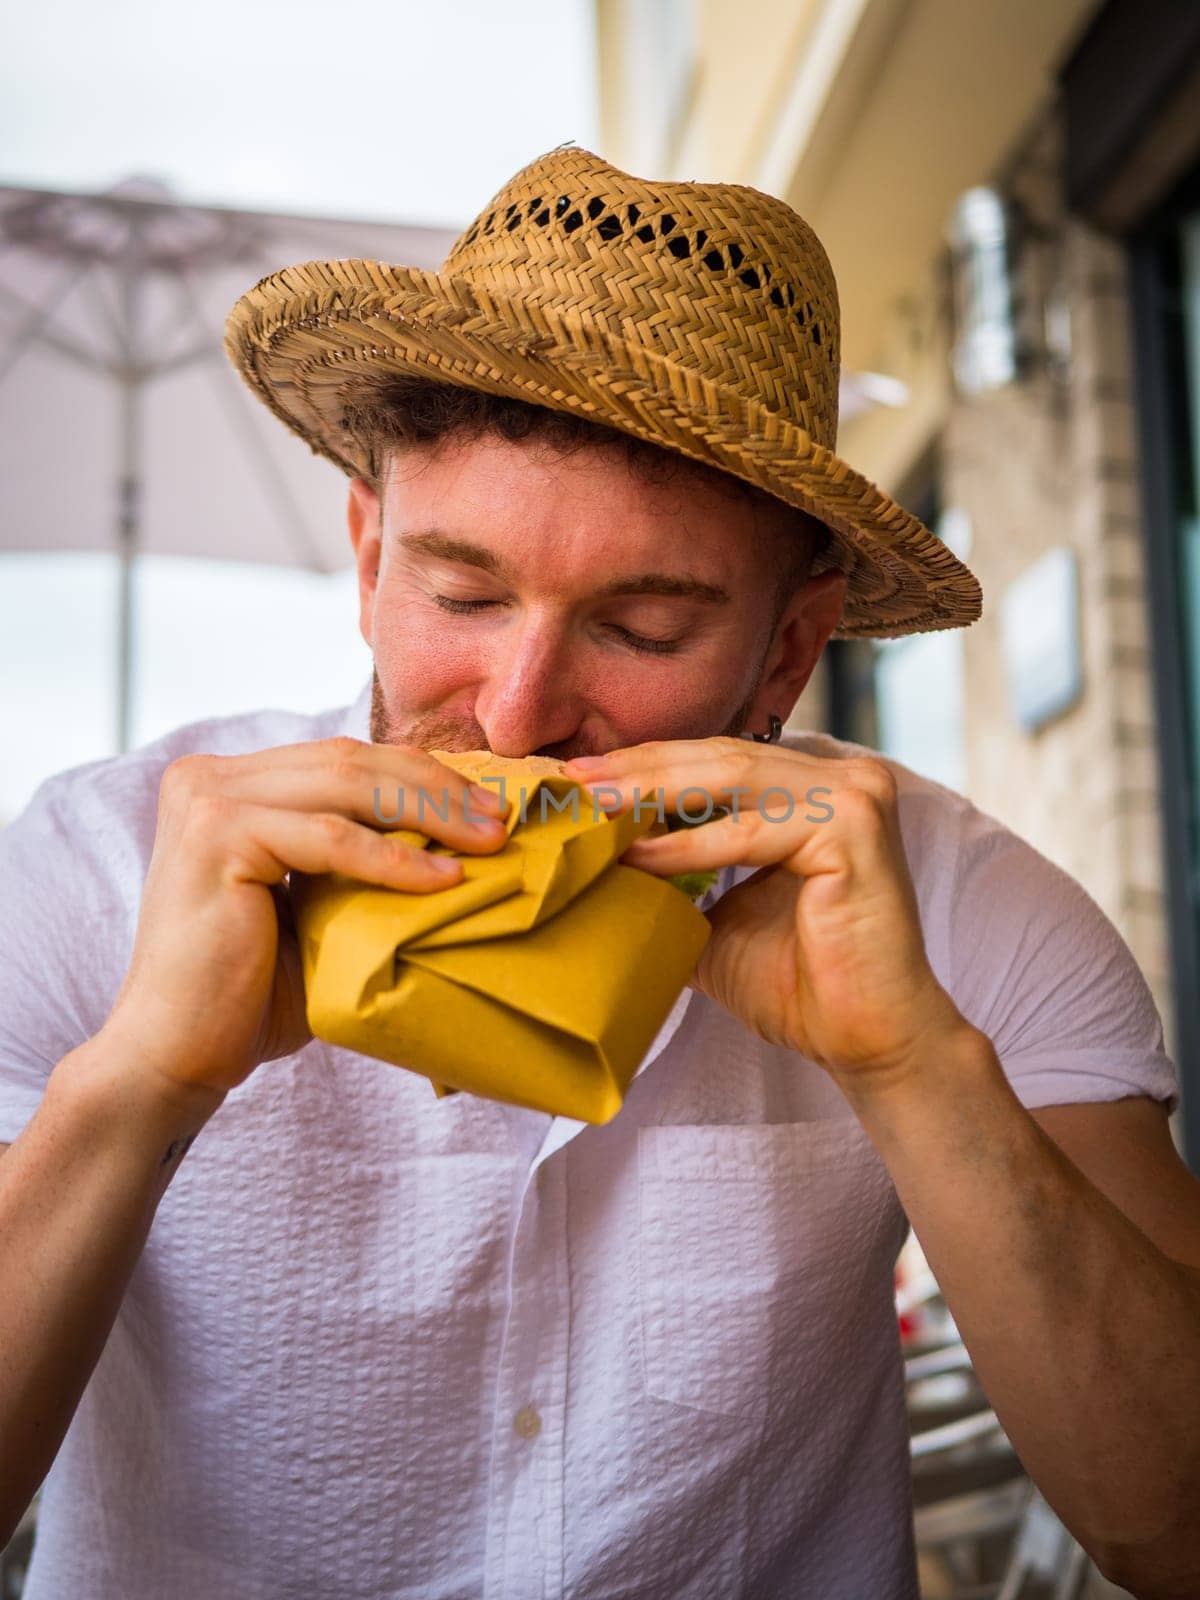 A man in a straw hat is holding a sandwich outdoor, sitting and looking at the food.